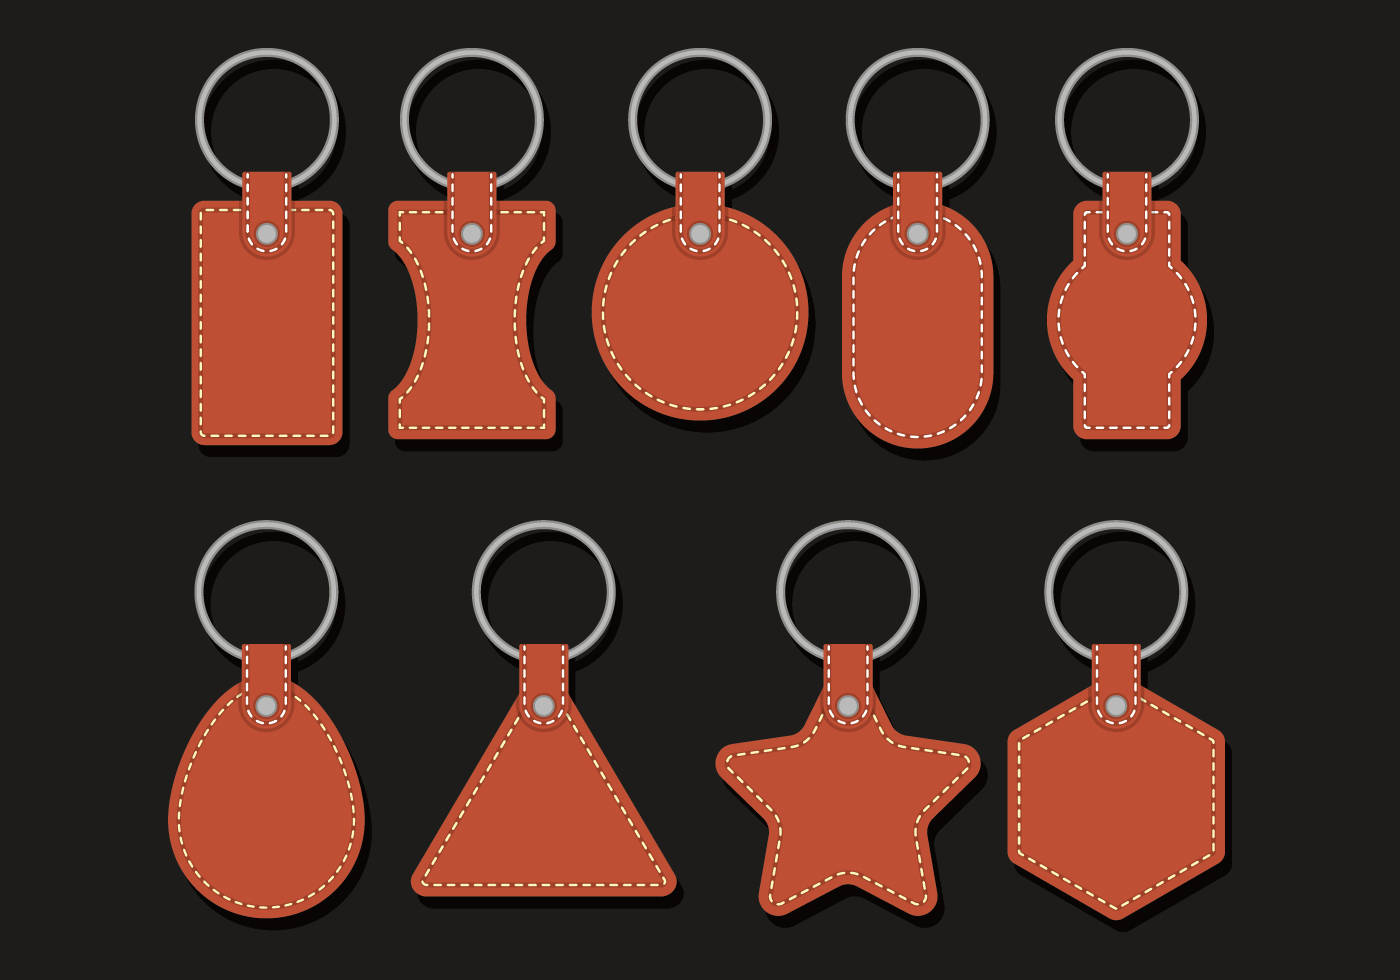 Leather Keychains Vectors - Download Free Vector Art, Stock Graphics